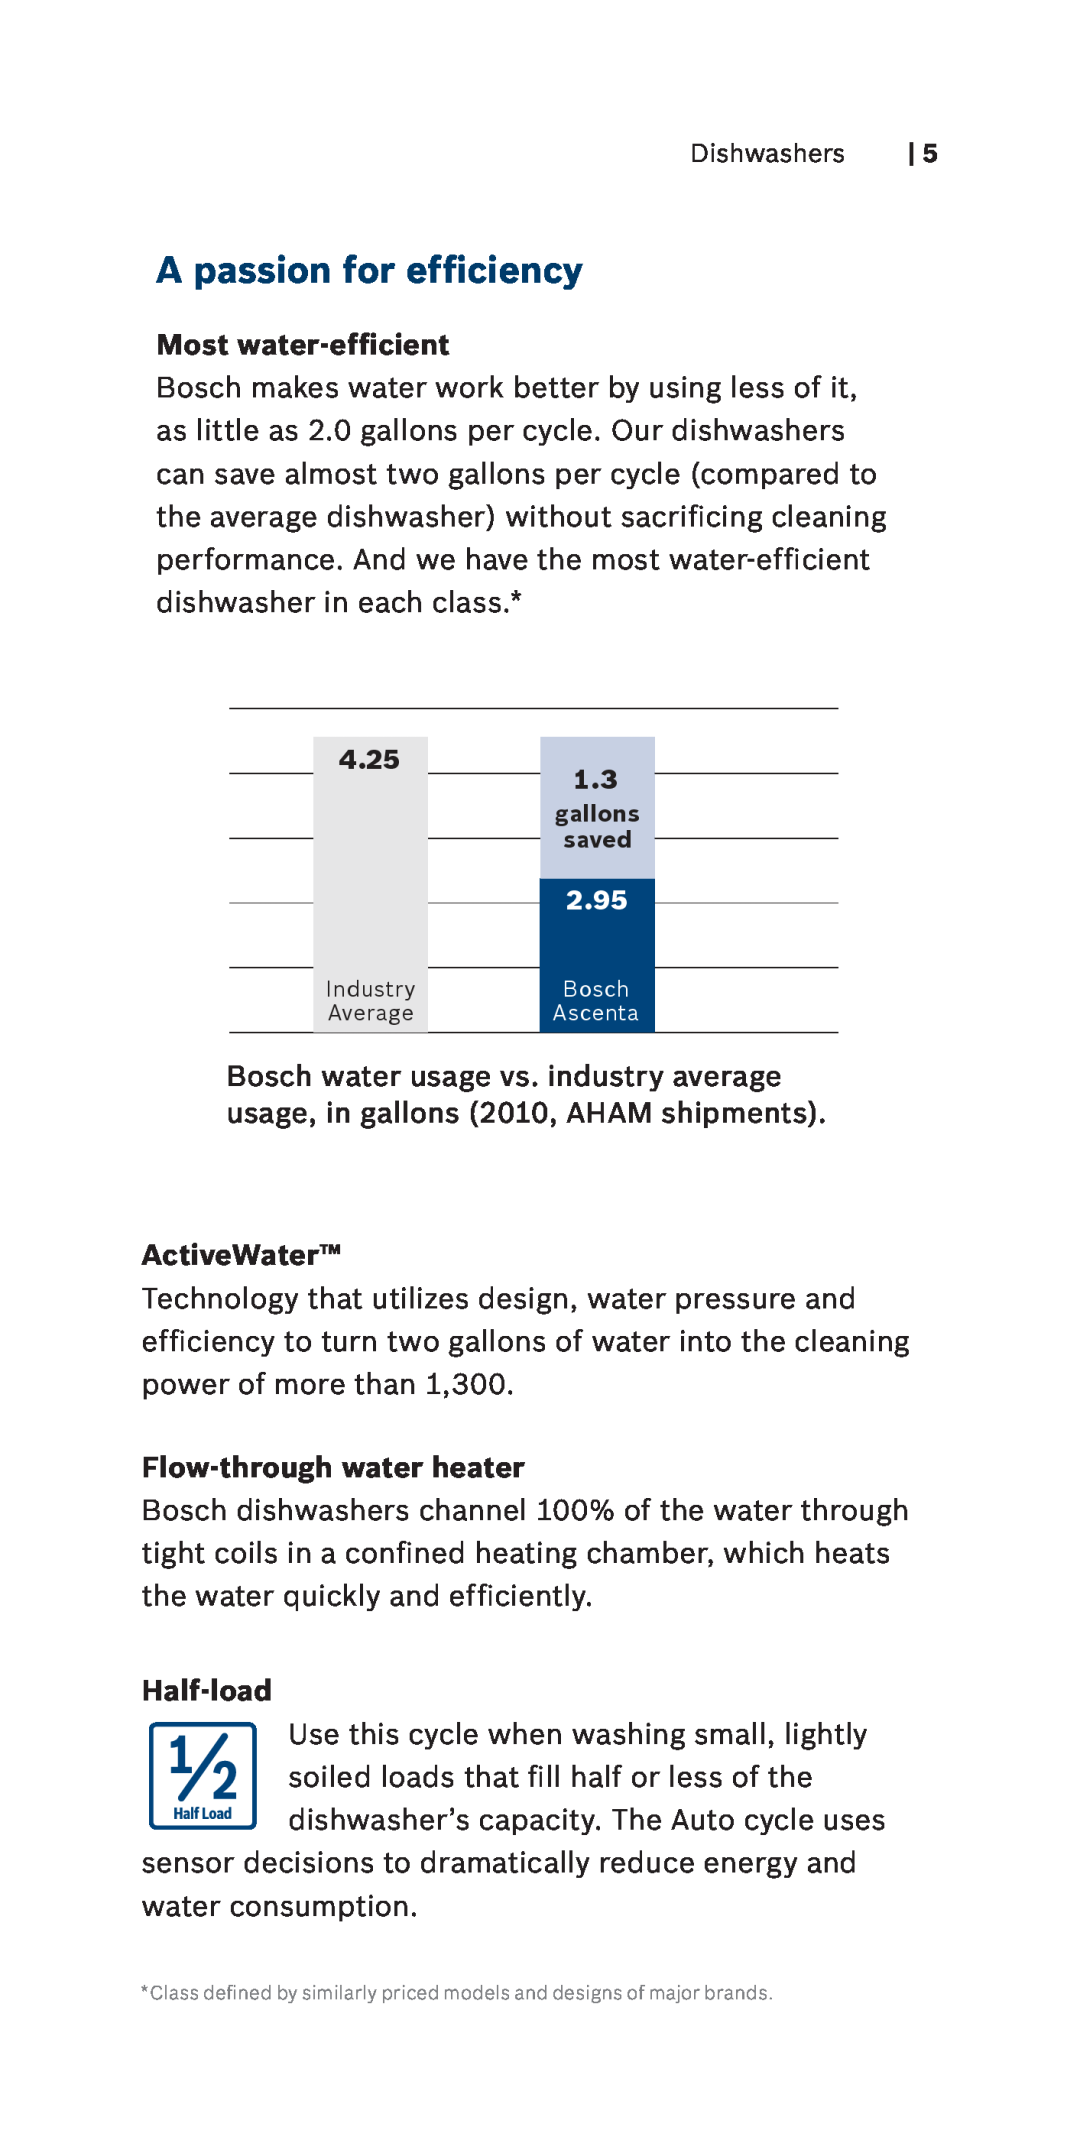 Bosch Appliances 800 Series manual A passion for efficiency, Most water-efficient, ActiveWater, Flow-through water heater 